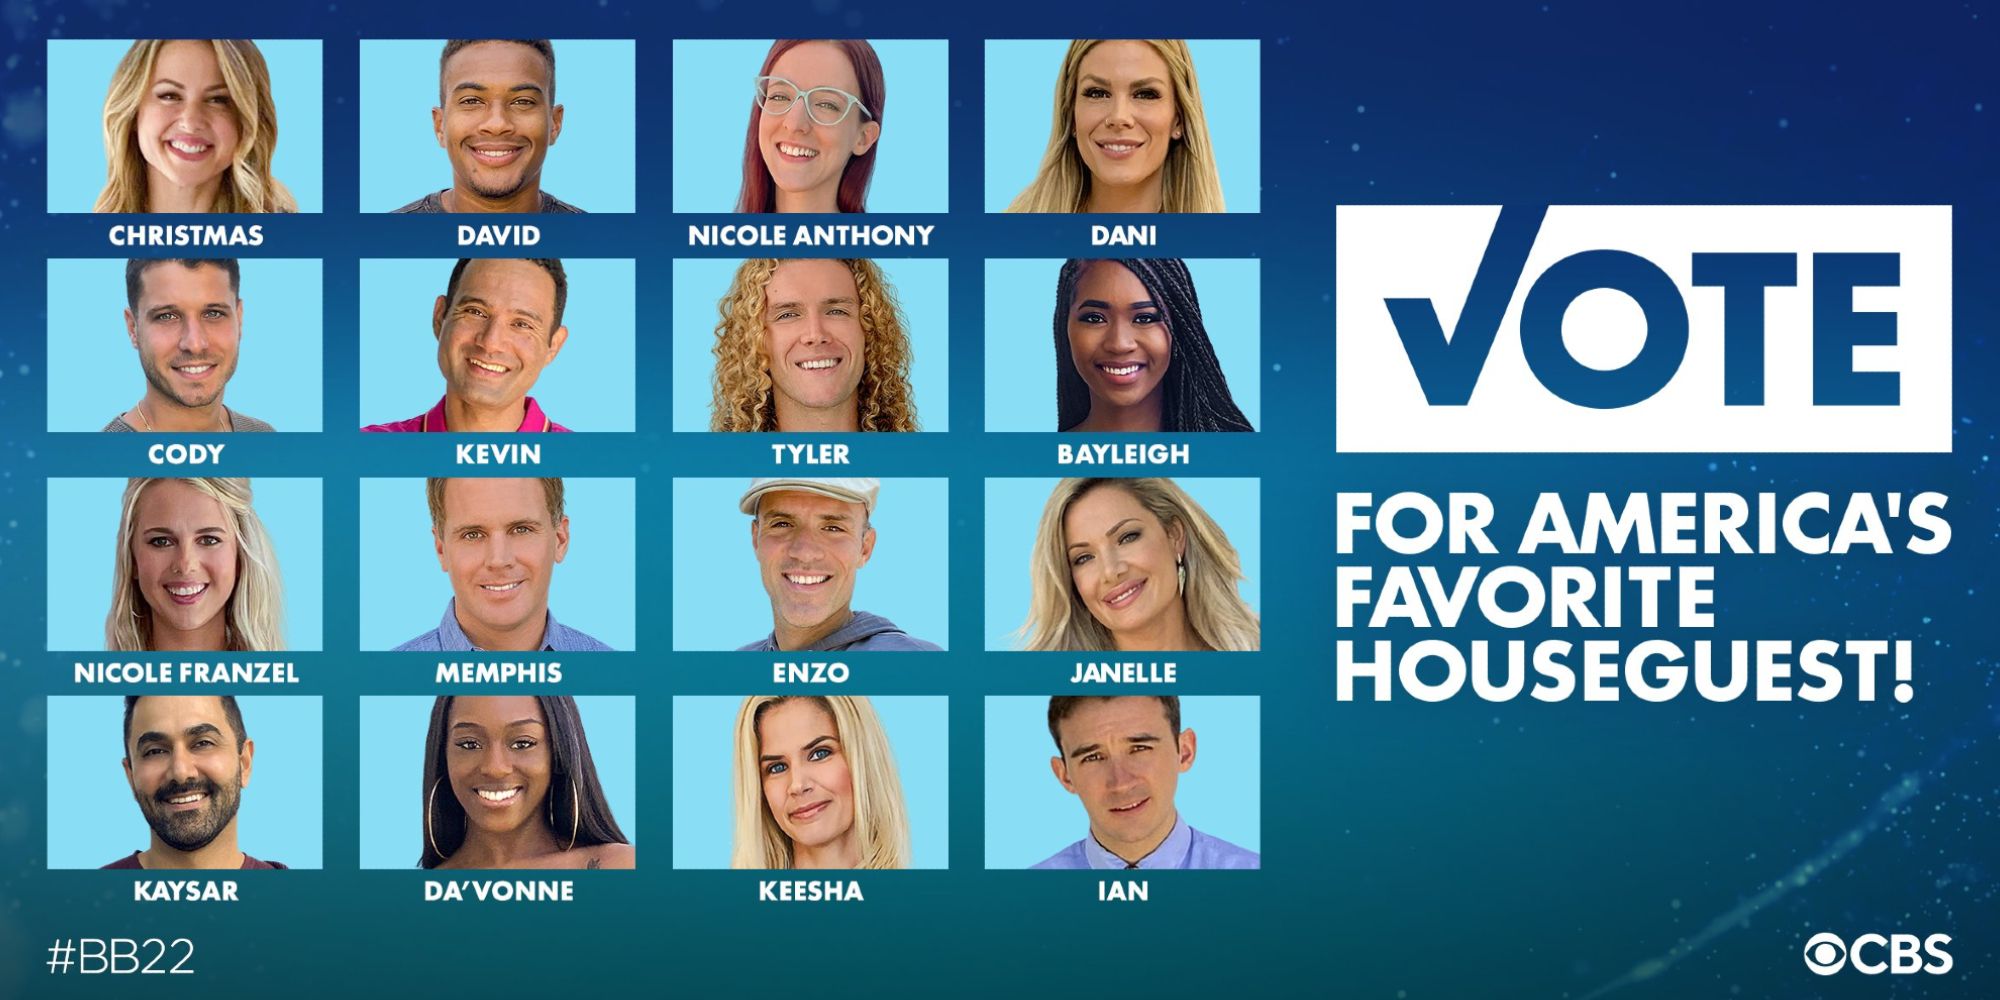 Big Brother 22 How To Vote For America's Favorite Houseguest